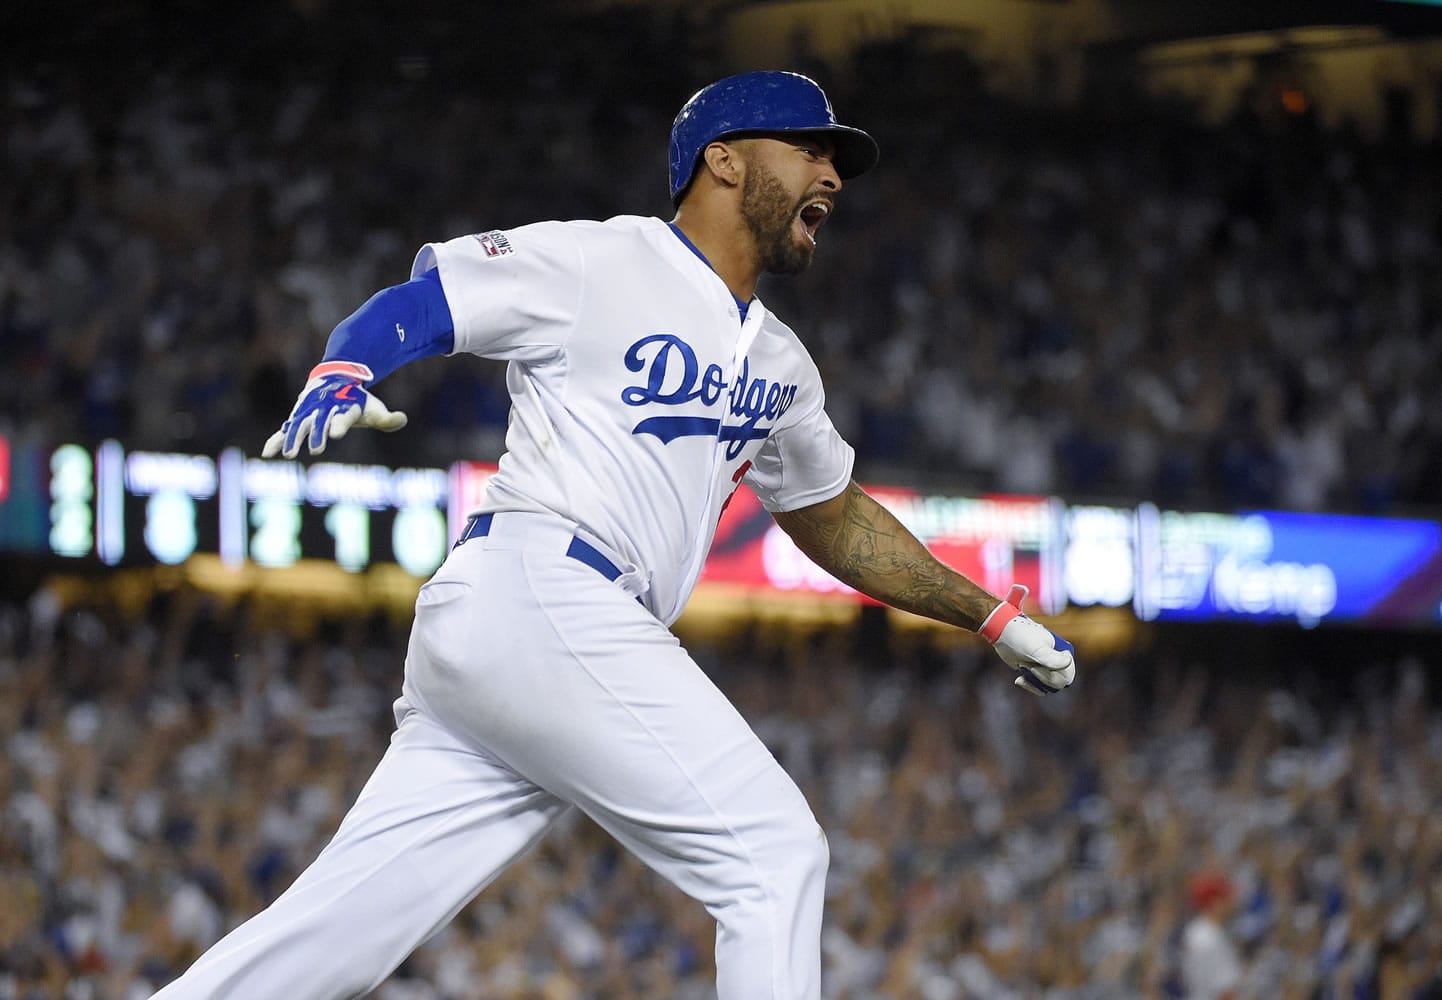 Los Angeles Dodgers' Matt Kemp celebrates his home run against the St. Louis Cardinals during the eighth inning in Game 2 in the NL Division Series in Los Angeles, Saturday, Oct. 4, 2014. (AP Photo/Mark J.